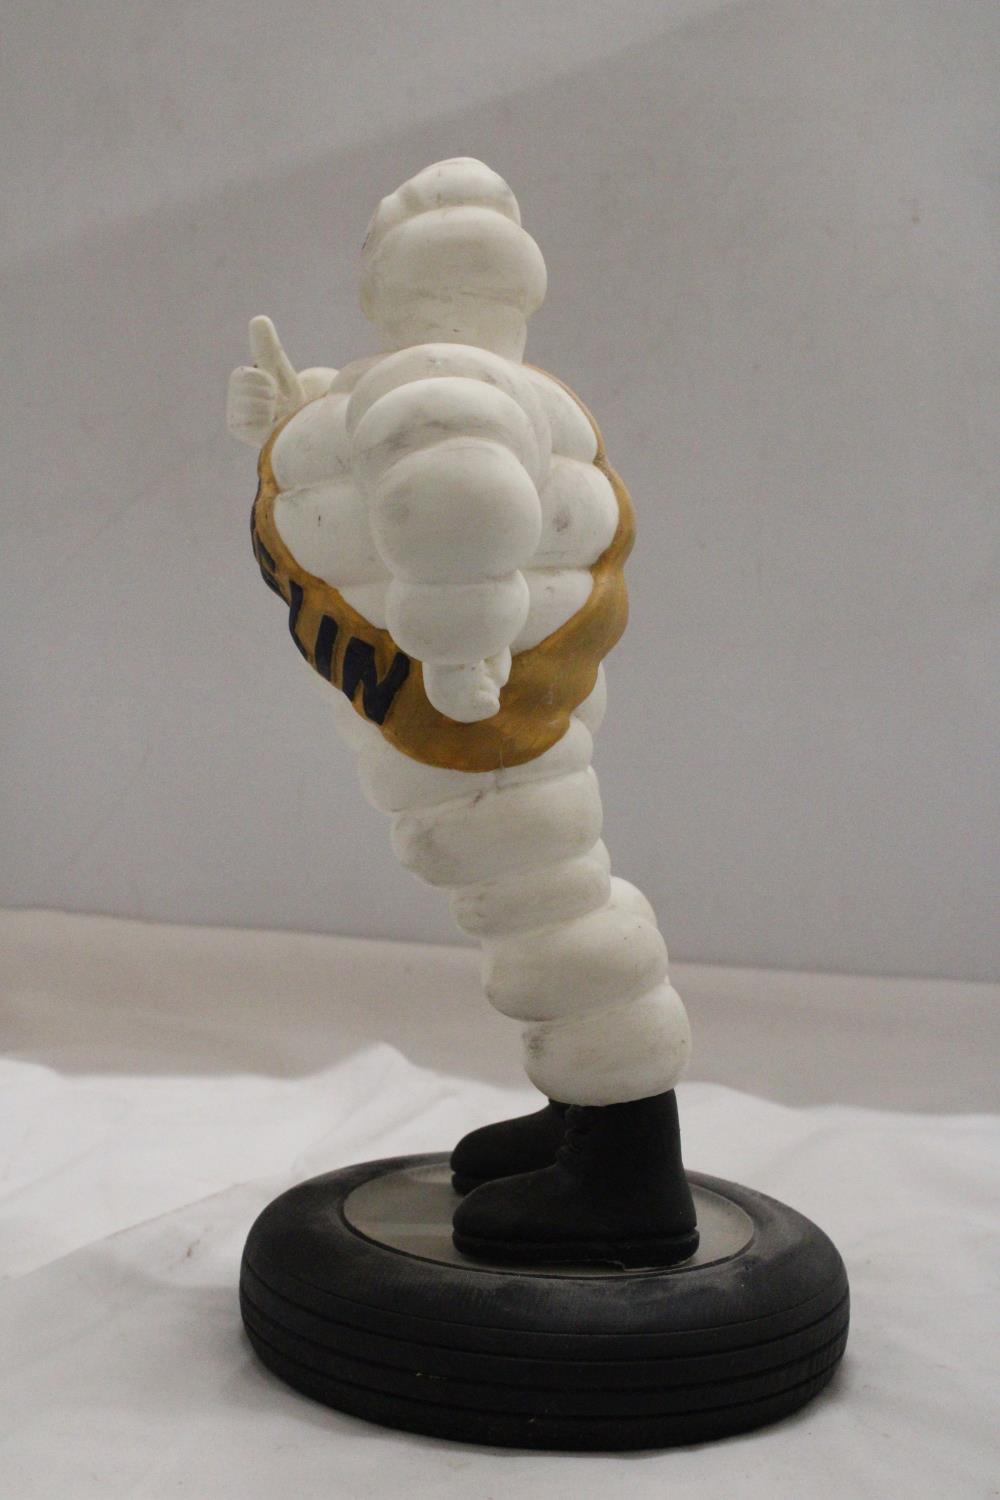 A VINTAGE ORIGINAL MICHELIN MAN ON TYRE APPROXIMATELY 33 CM HIGH - Image 3 of 5